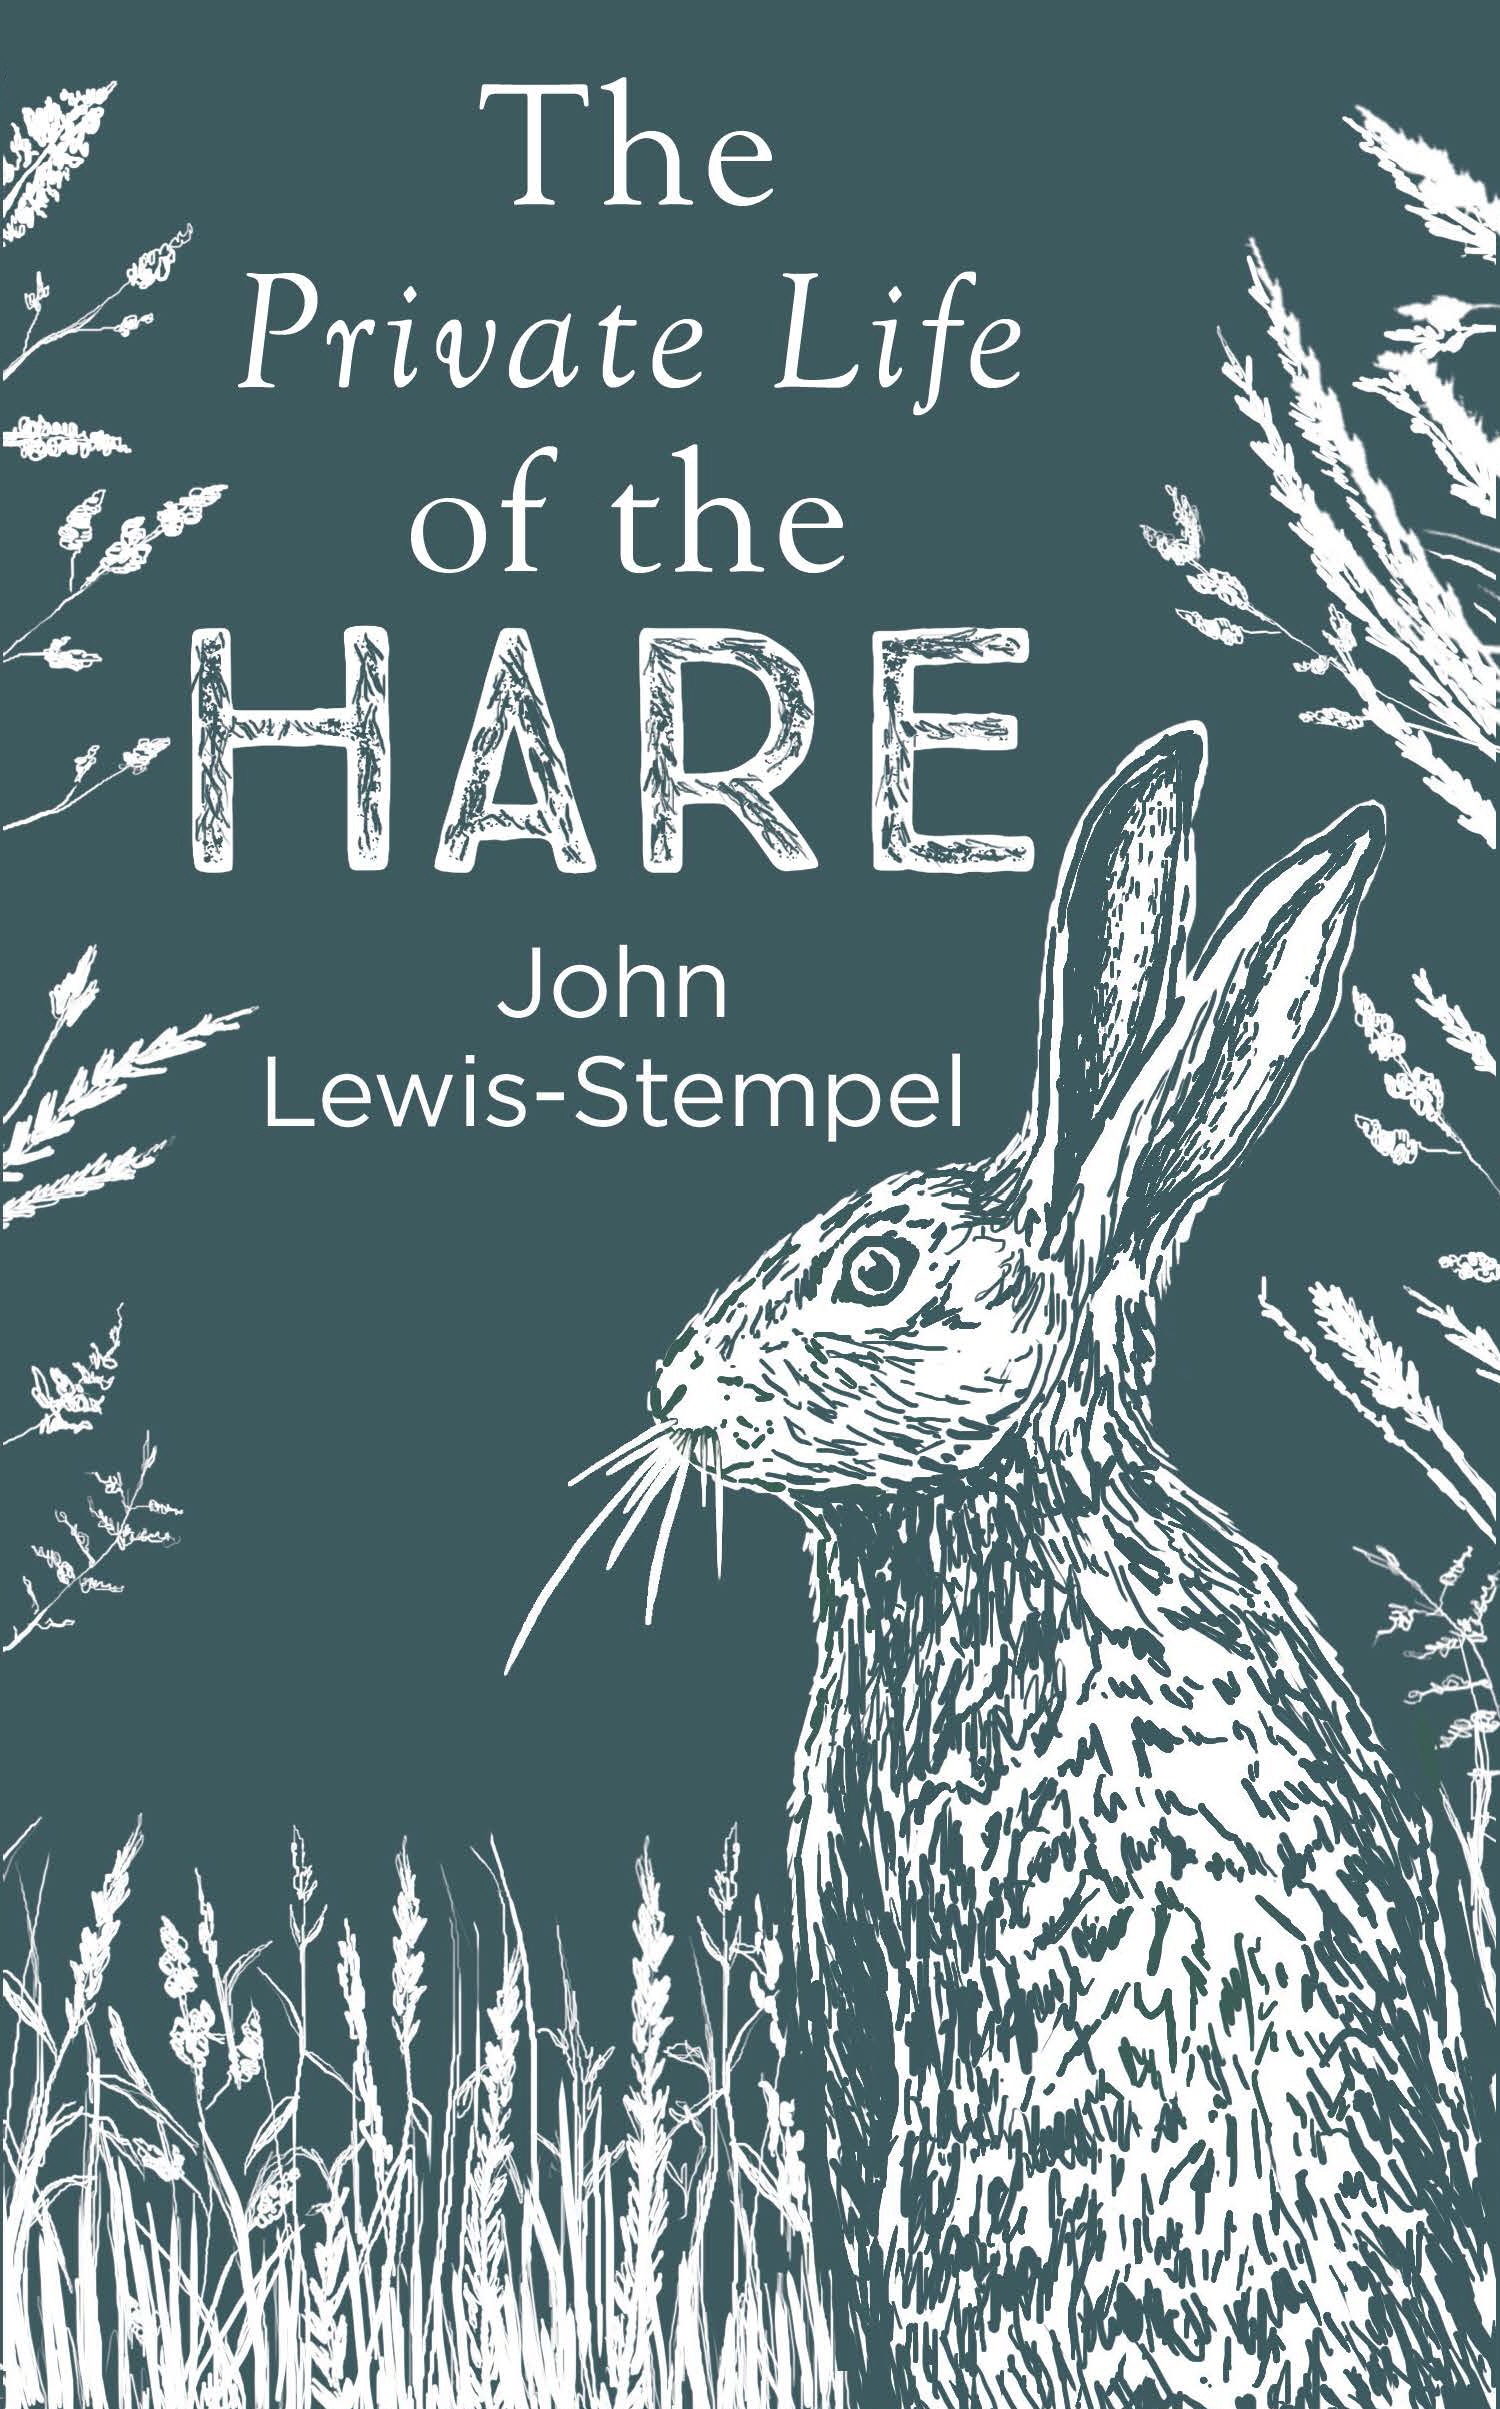 Book “The Private Life of the Hare” by John Lewis-Stempel — October 17, 2019